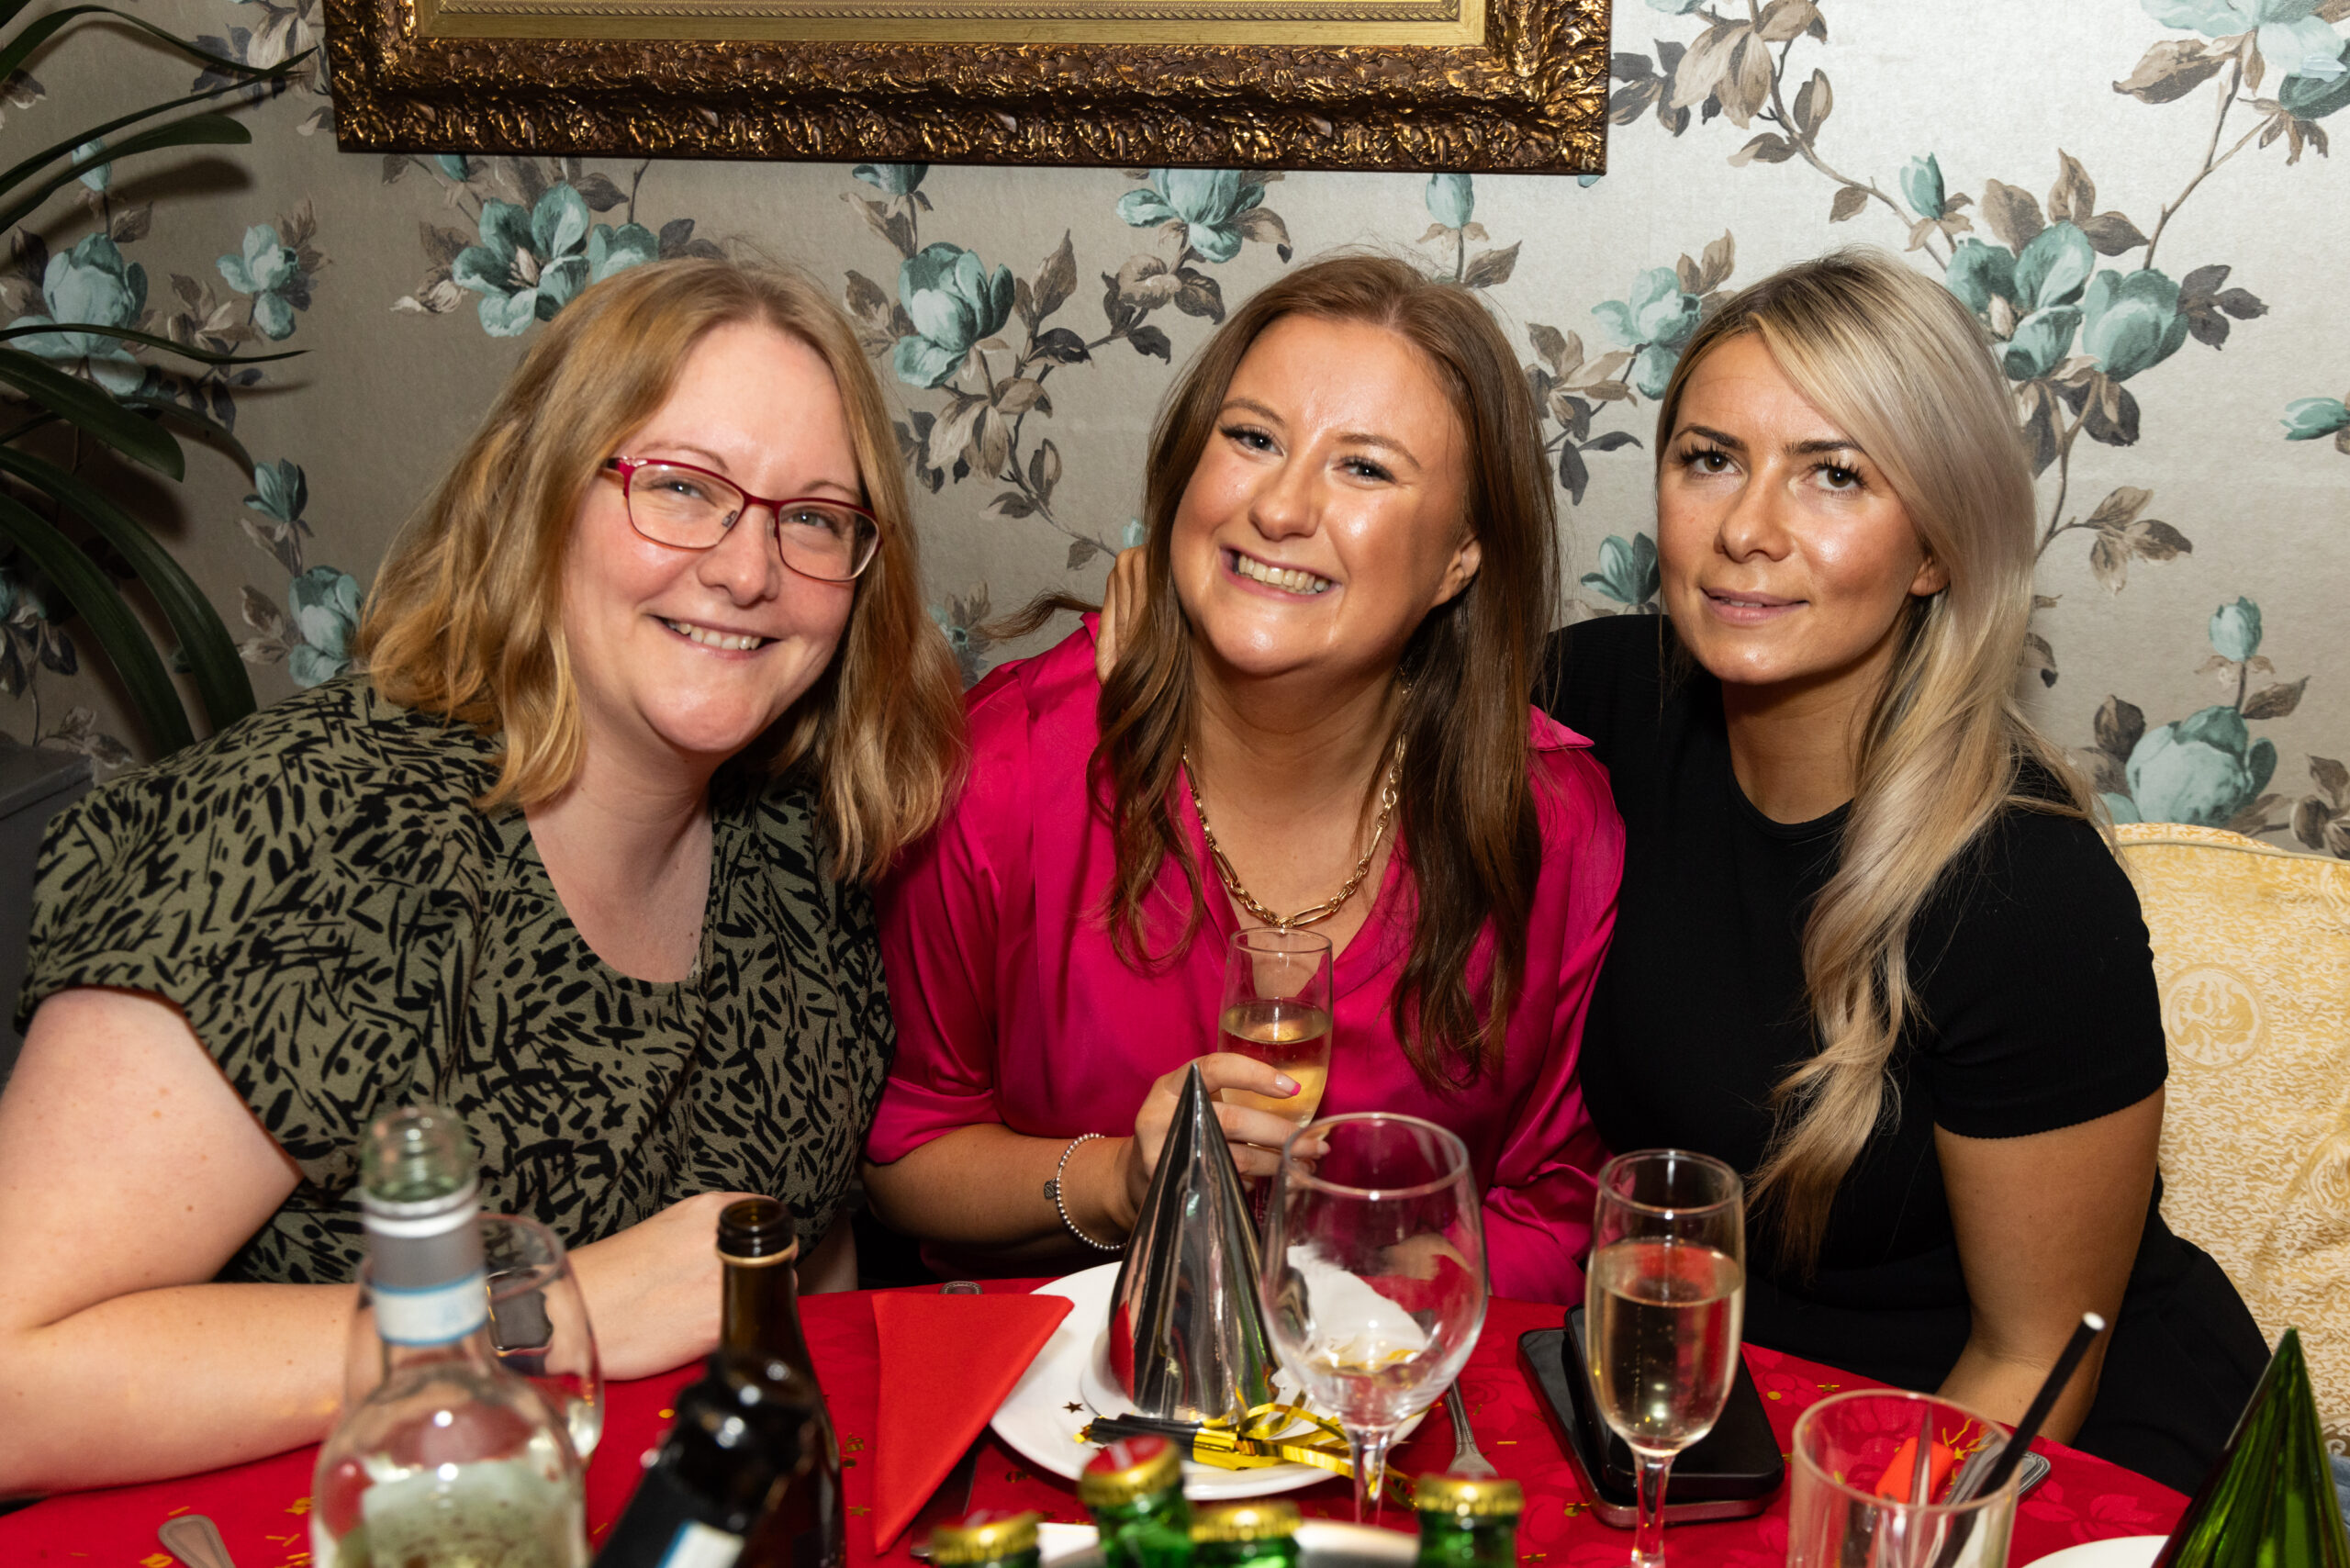 Colleagues at United Legal Assistance in Southport have enjoyed celebrating the firm's 10th birthday. Photo by Zack Downey for Stand Up For Southport